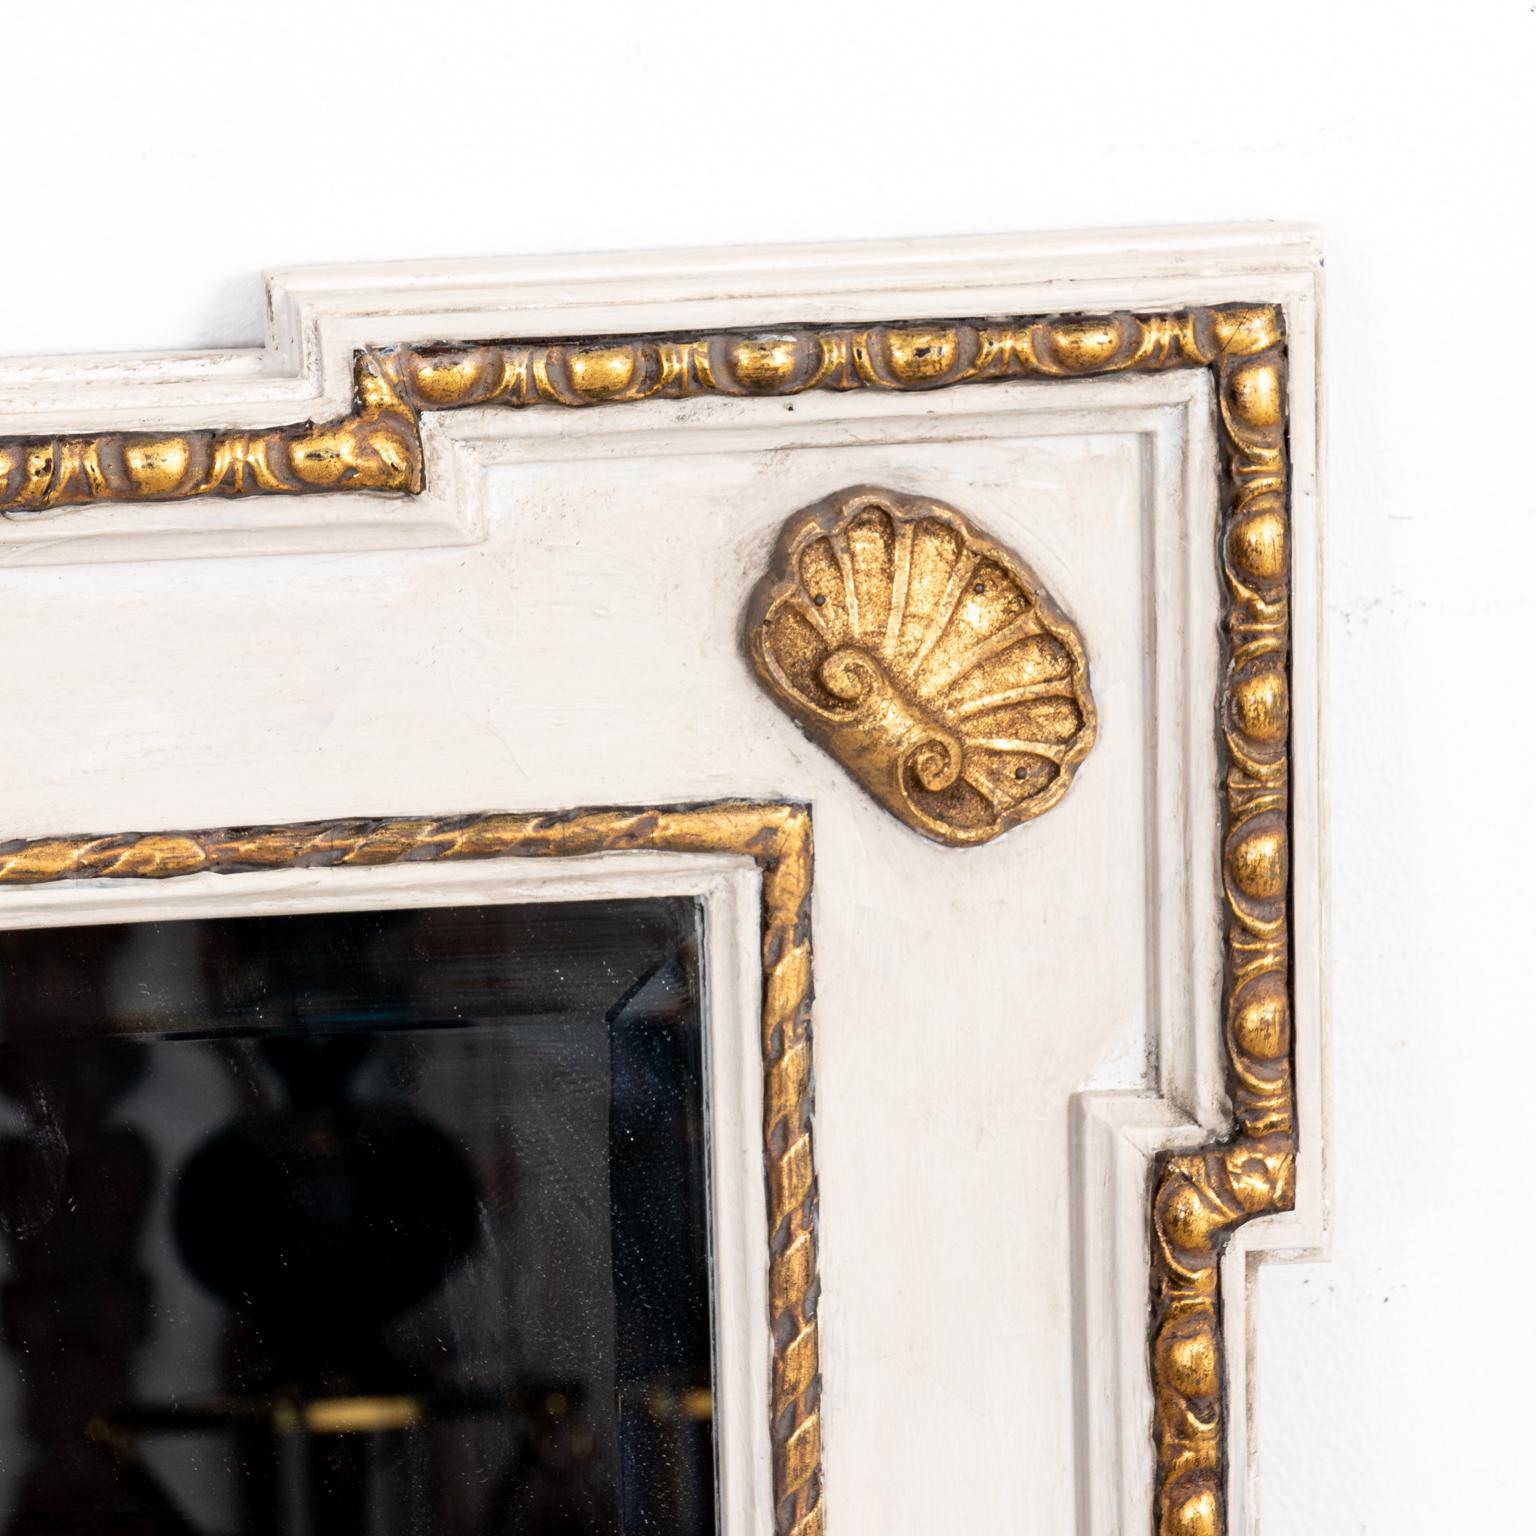 Circa 1940s architectural painted and gilt Georgian style mirror with egg-and-dart molding surrounding the exterior perimeter of the mirror frame. Each dog ear corner features a gilded scallop seashell motif with the inner molding accented by a